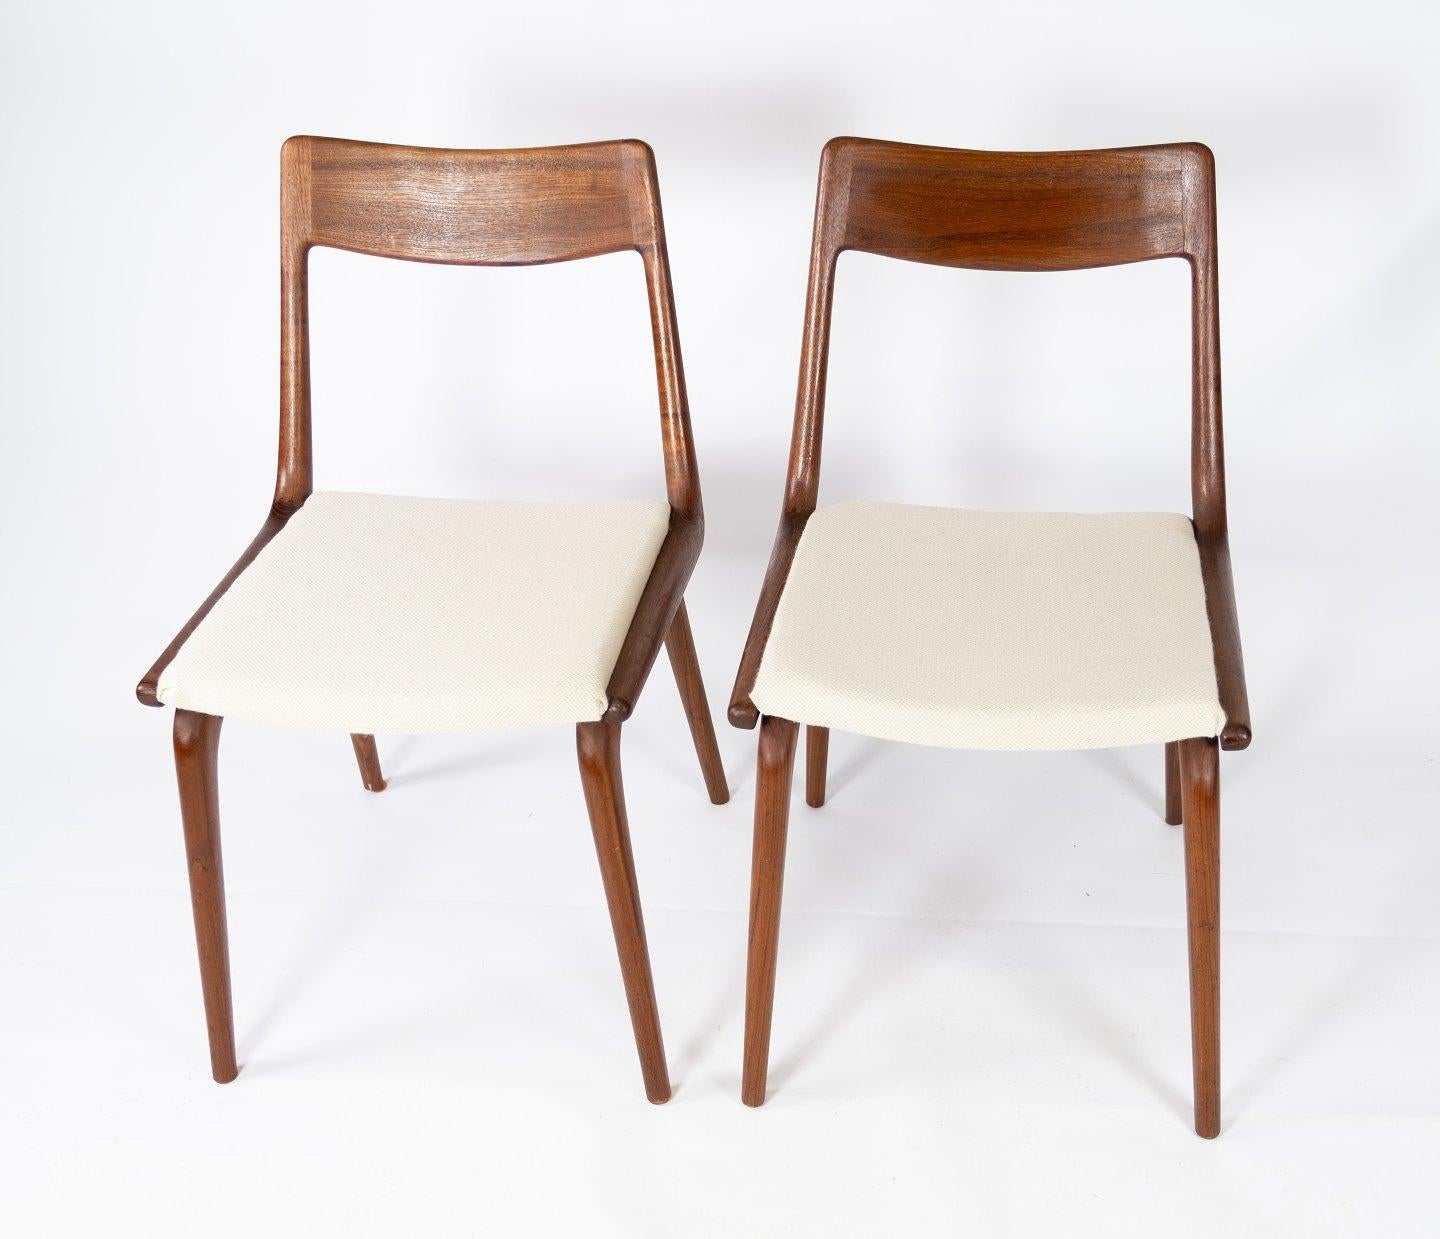 A papir of dining chairs, model Boomerang, in teak and light wool fabric designed by Alfred Christensen from the 1960s. The chairs are in great vintage condition.